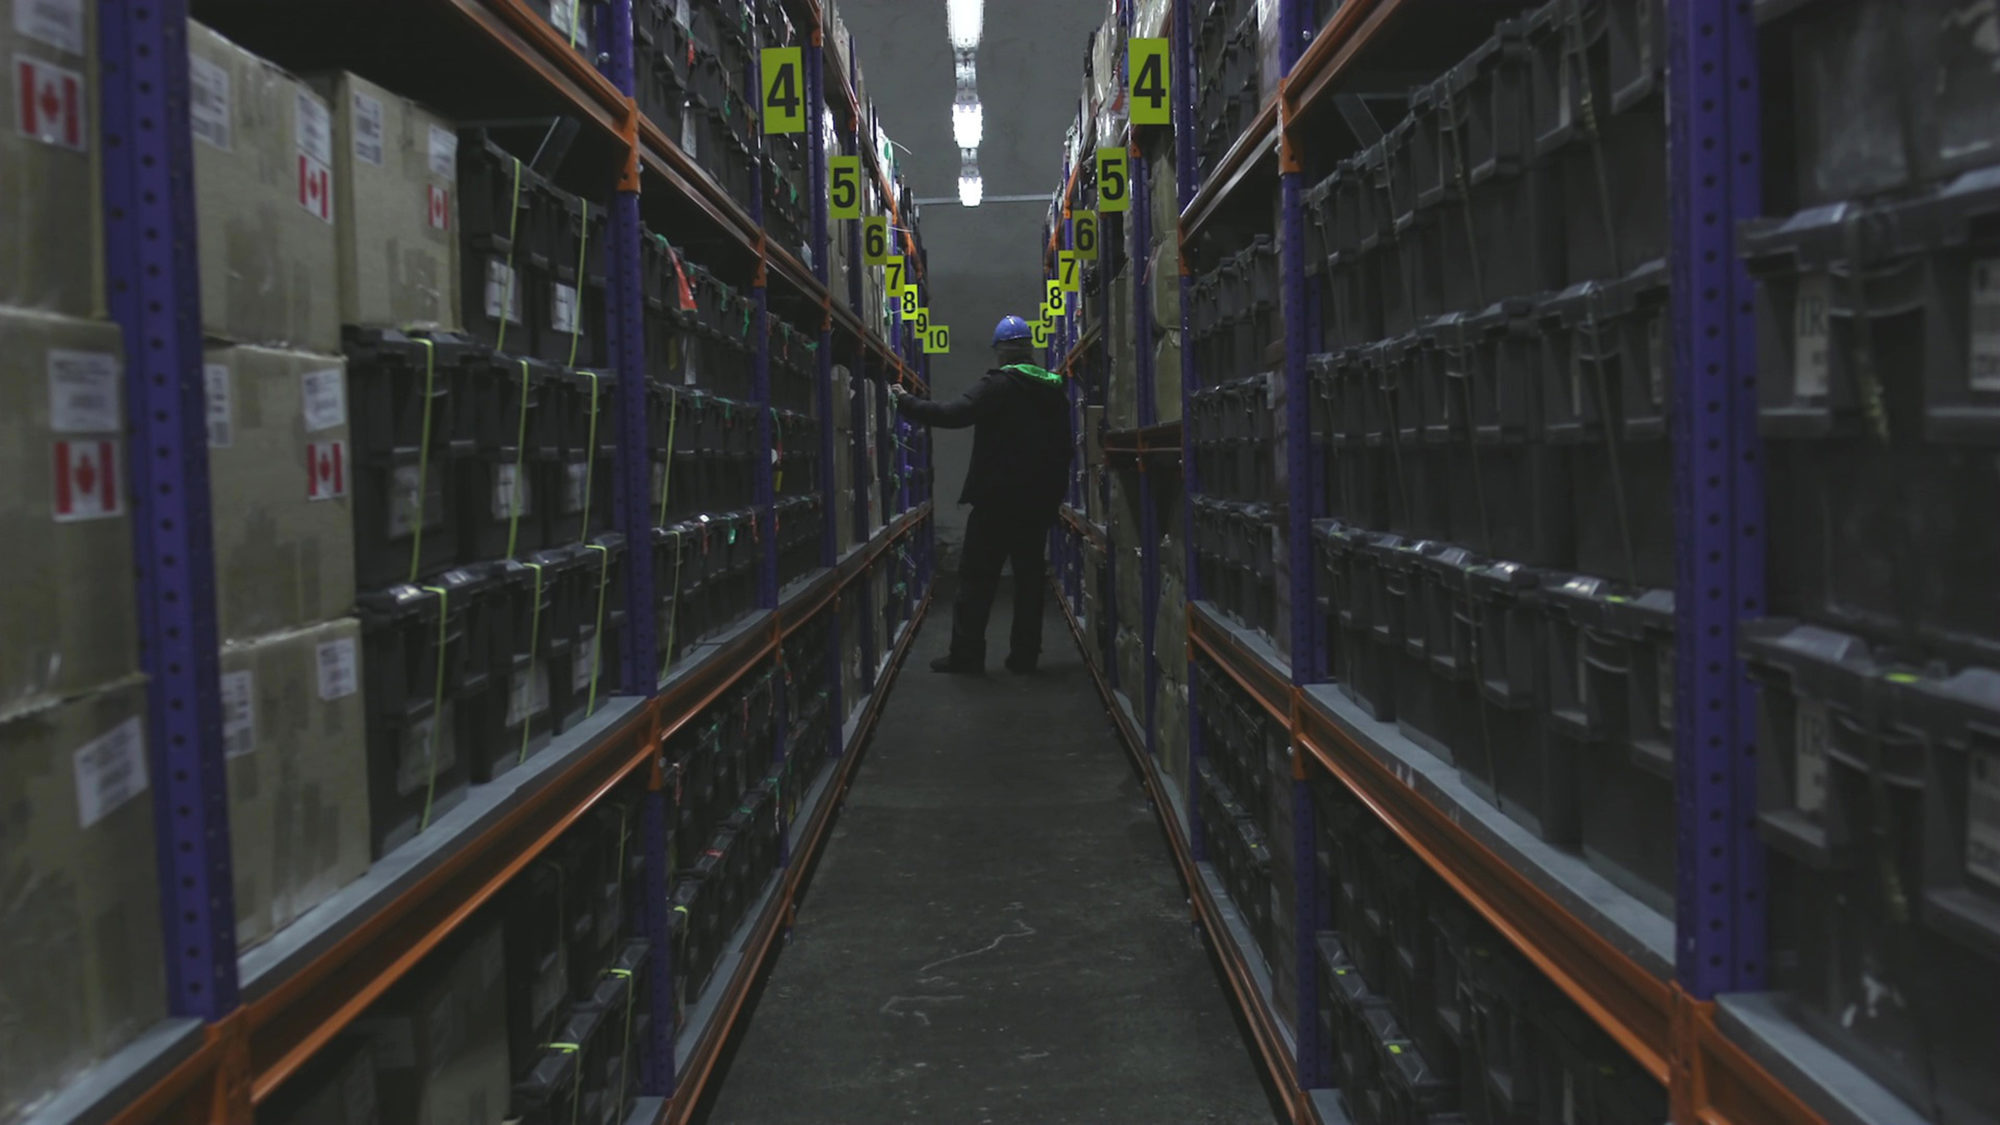 video still of a construction worker looking at items inside a factory